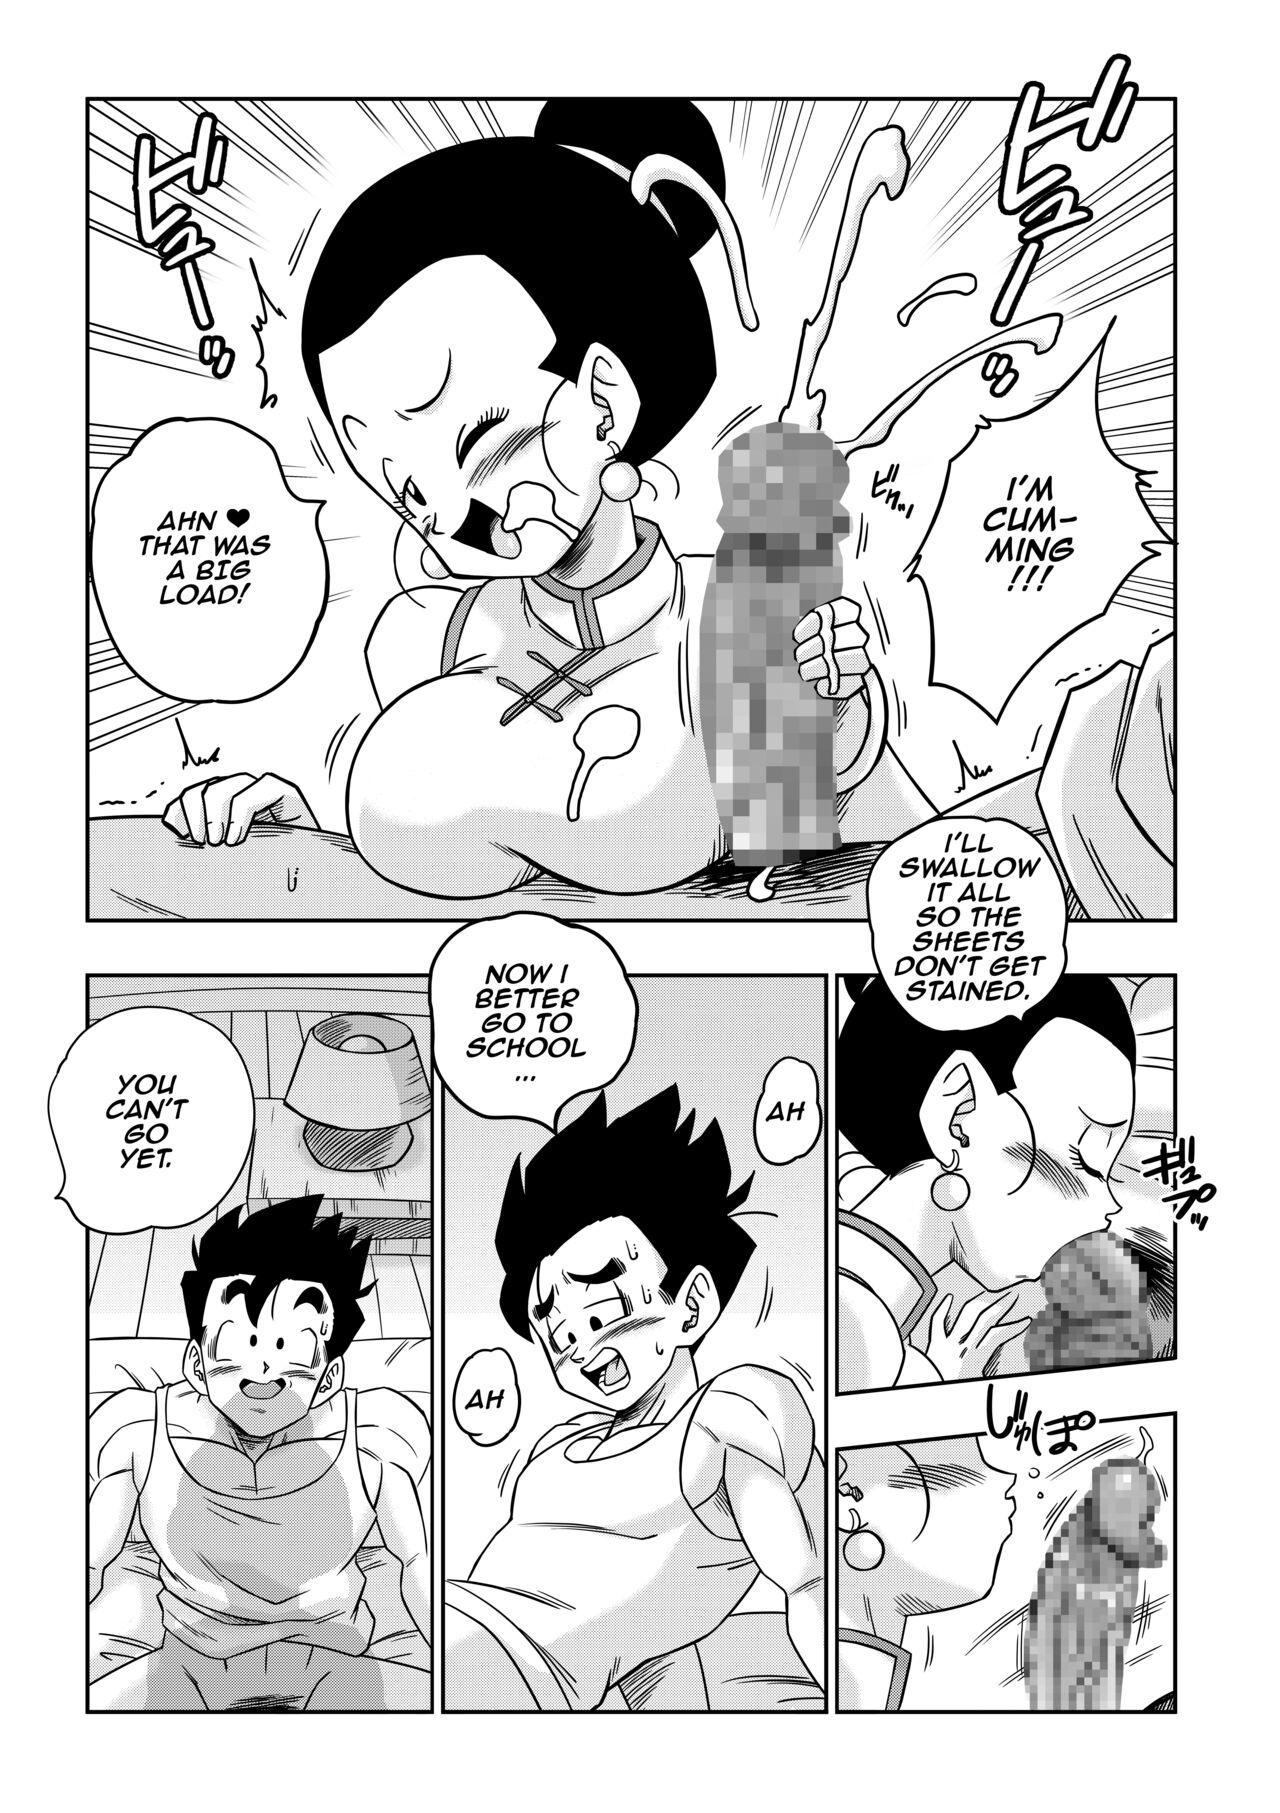 Hidden Cam LOVE TRIANGLE Z PART 5 - Dragon ball z All Natural - Page 7